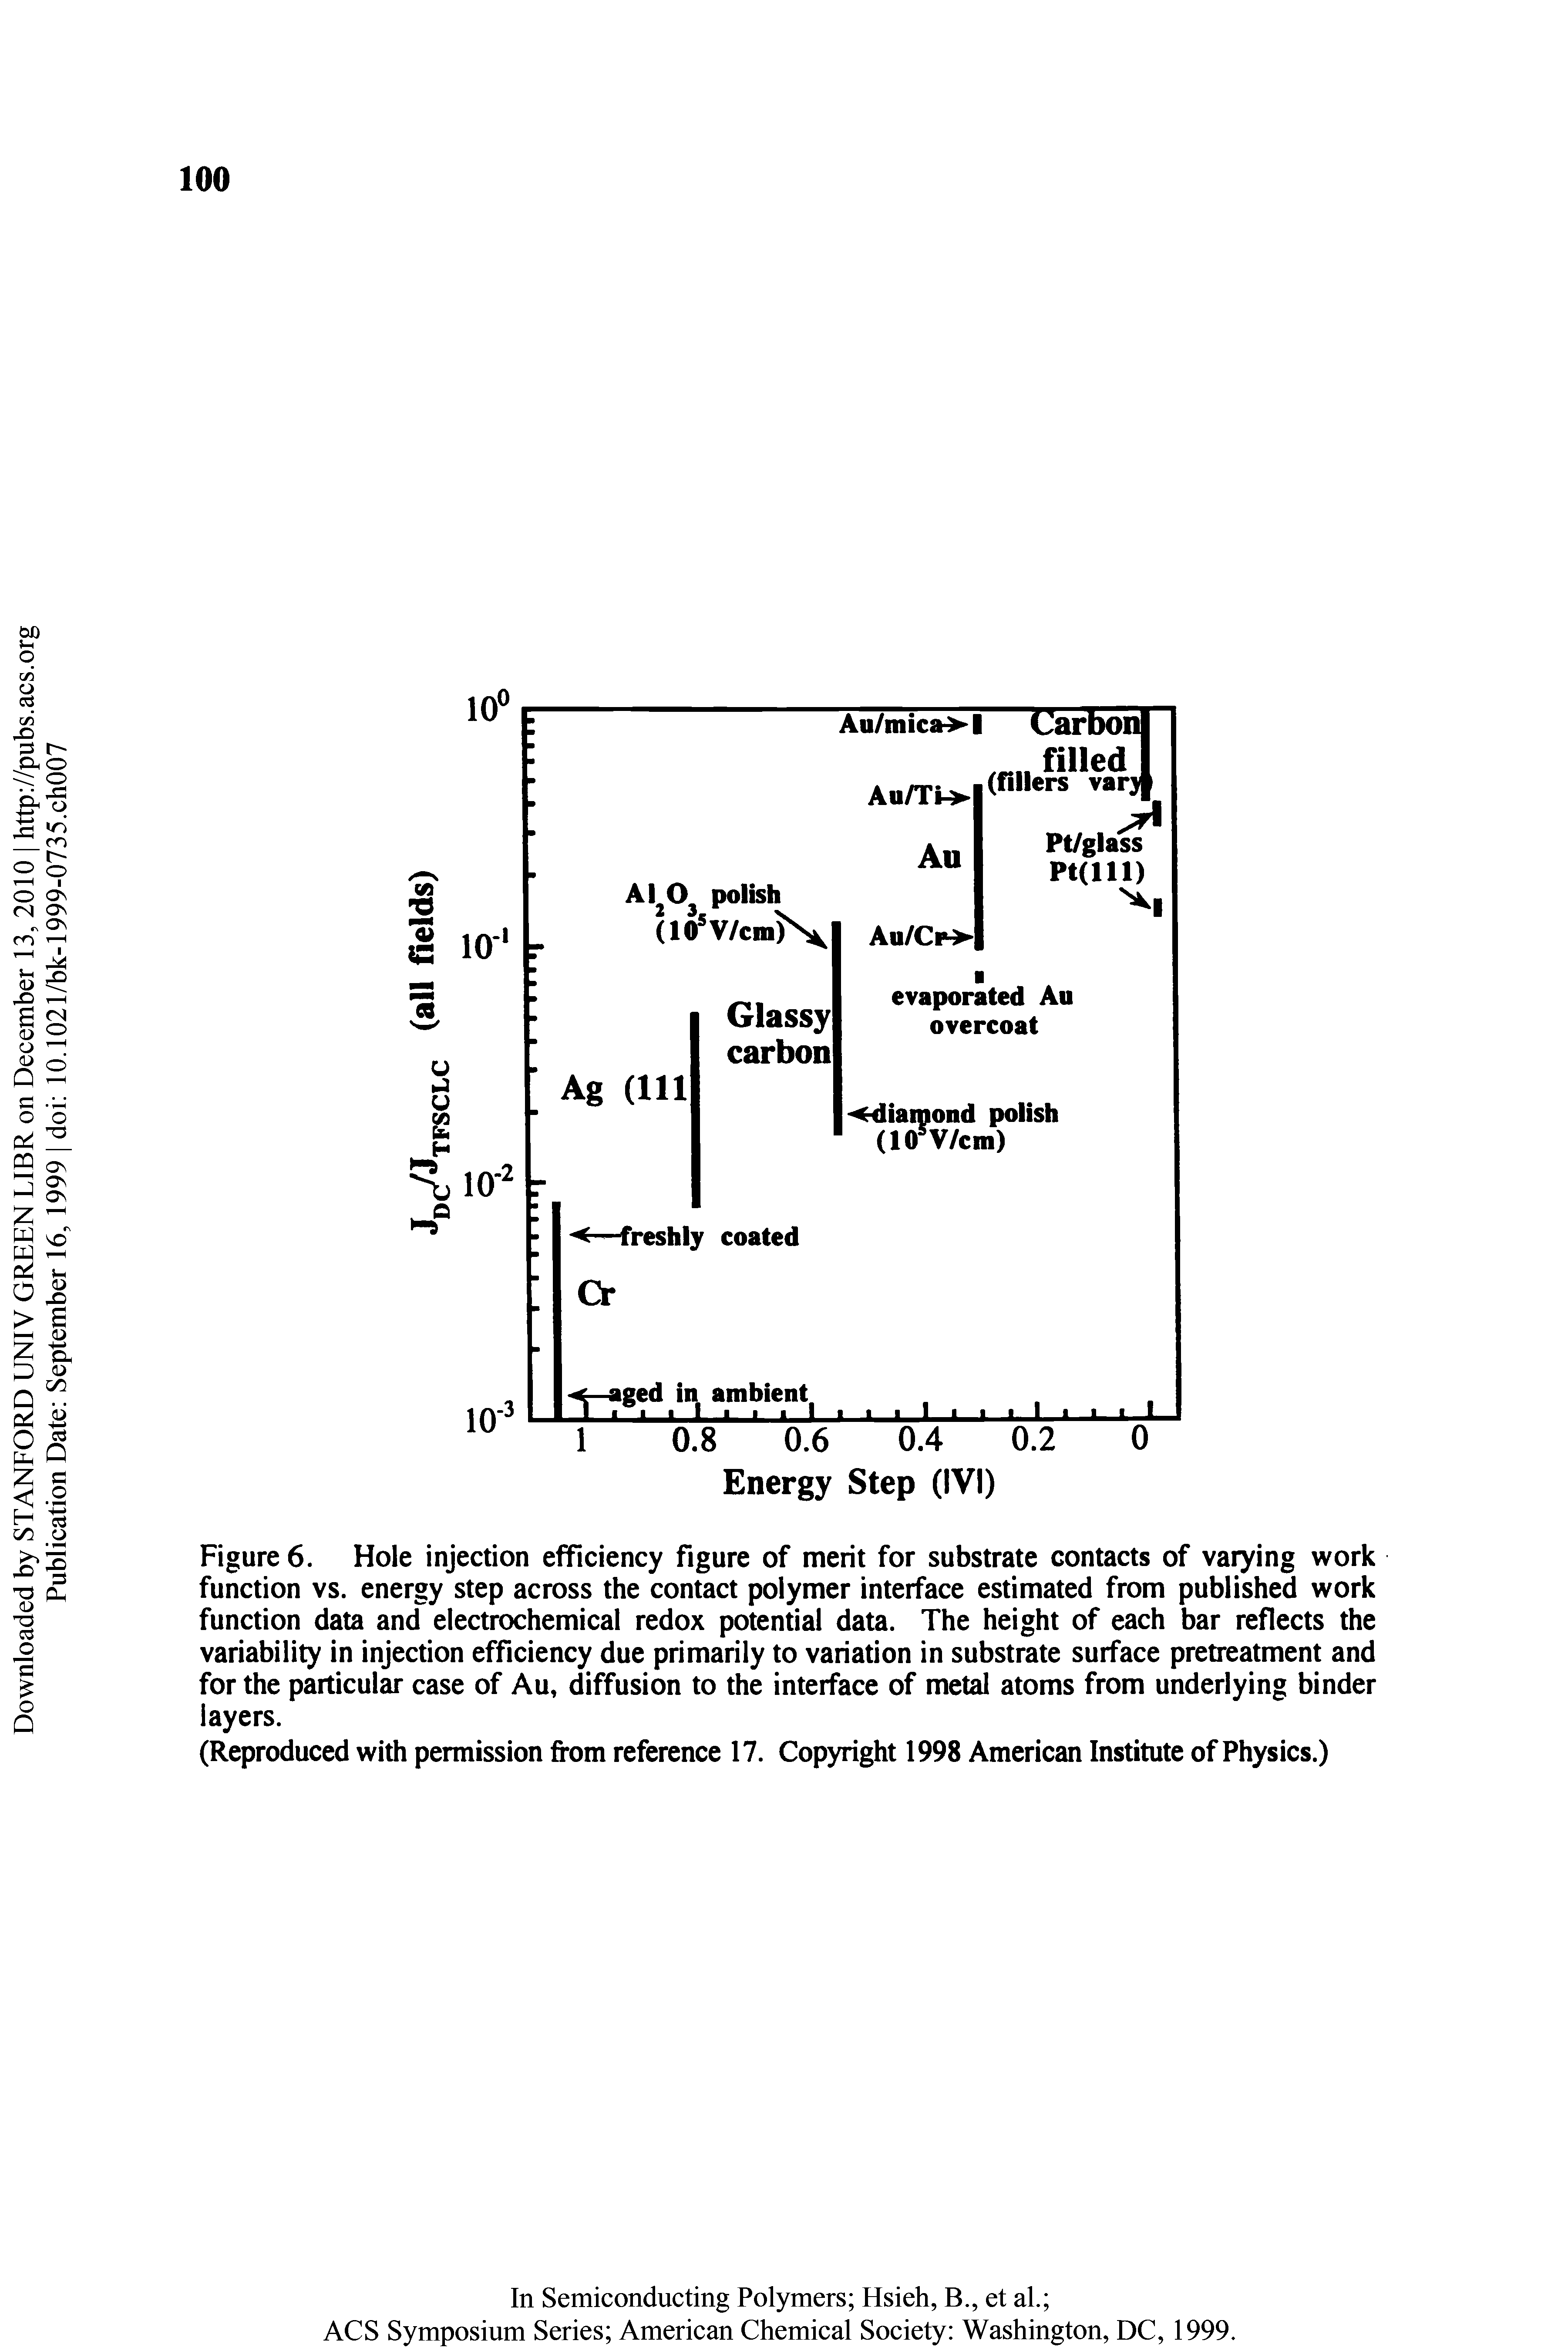 Figure 6. Hole injection efficiency figure of merit for substrate contacts of varying work function vs. energy step across the contact polymer interface estimated from published work function data and electrochemical redox potential data. The height of each bar reflects the variability in injection efficiency due primarily to variation in substrate surface pretreatment and for the particular case of Au, diffusion to the interface of metal atoms from underlying binder layers.